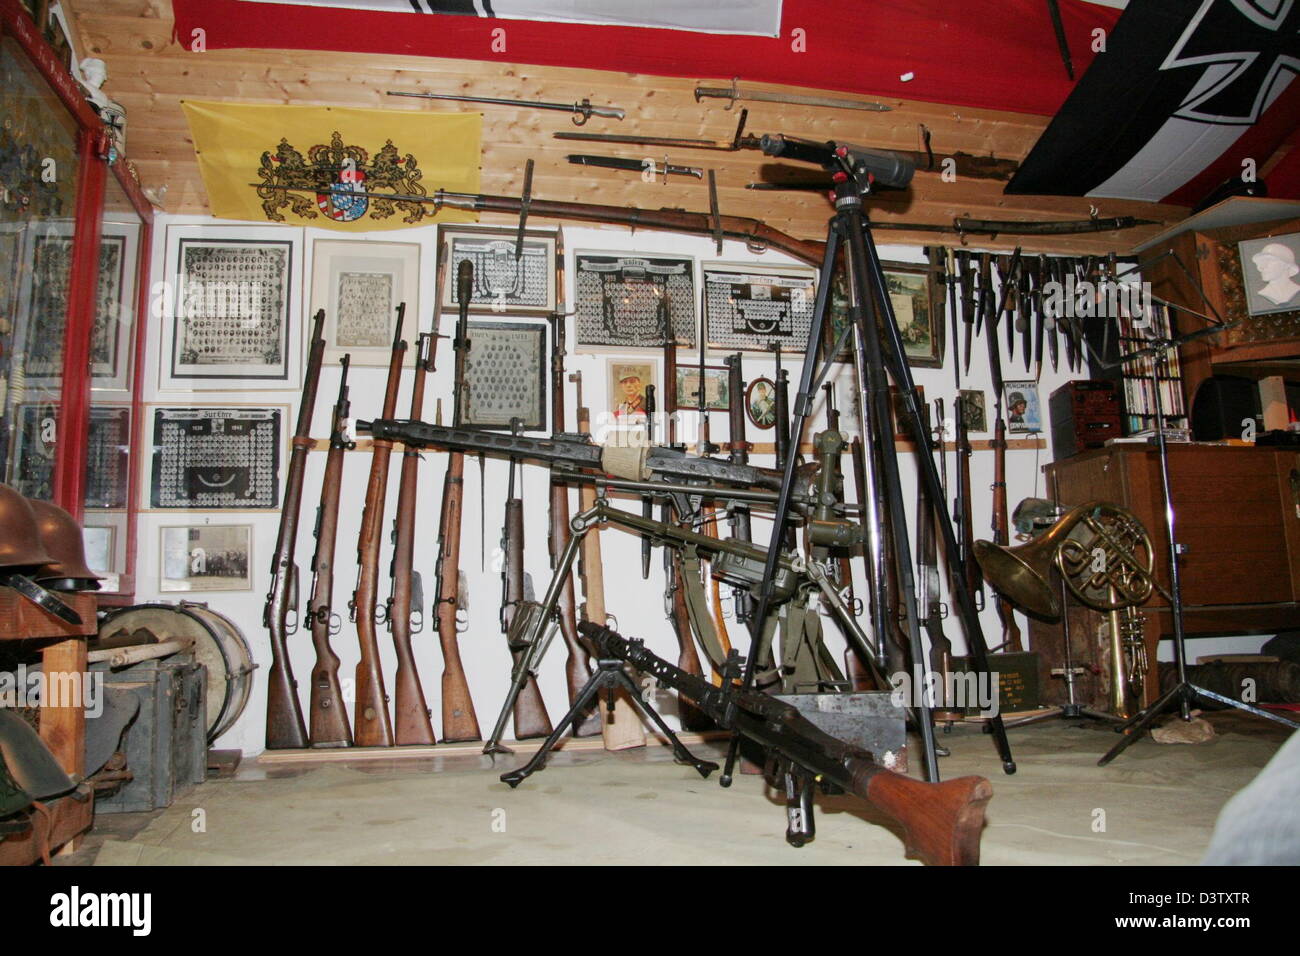 Police raided theis room equipped with Nazi symbols and weapons near Rosenheim, Germany, Tuesday, 28 November 2006. Several persons were arrested. Photo: Police Stock Photo